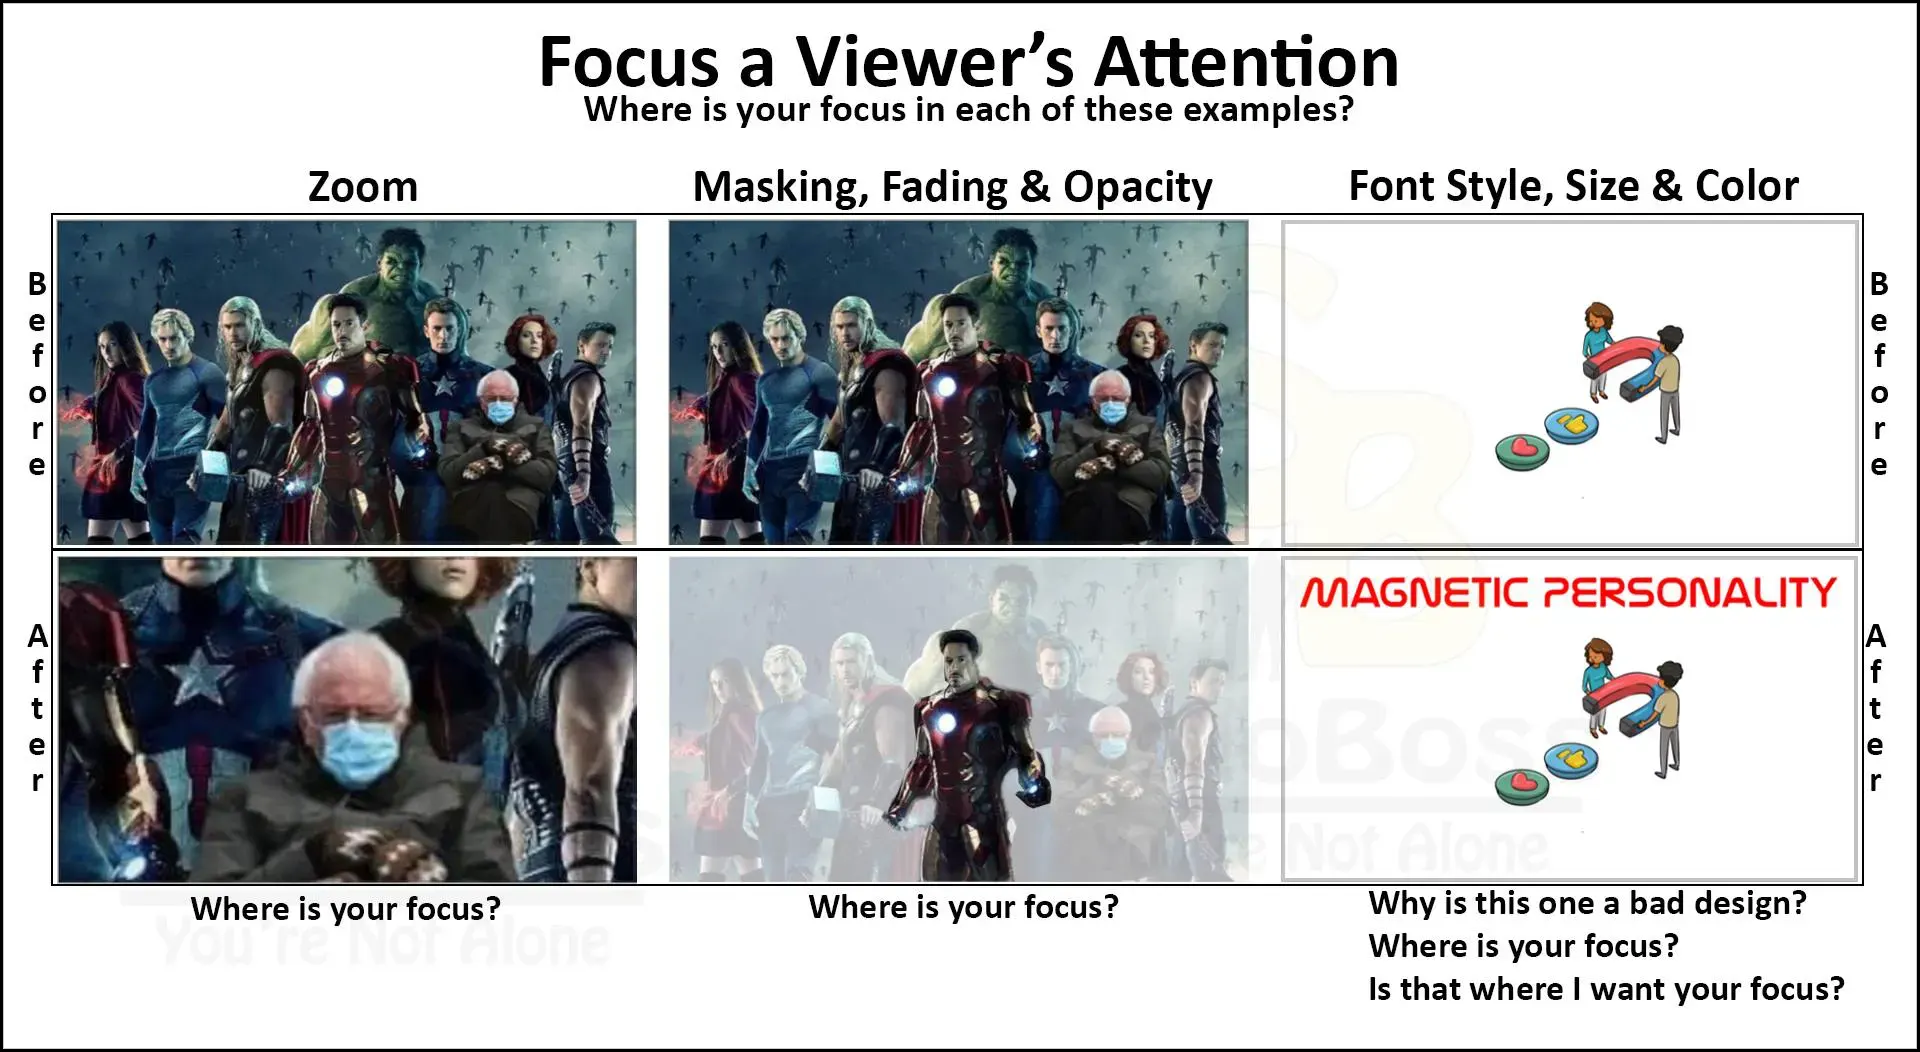 Demonstrating methods of focusing a viewers attention in a video.